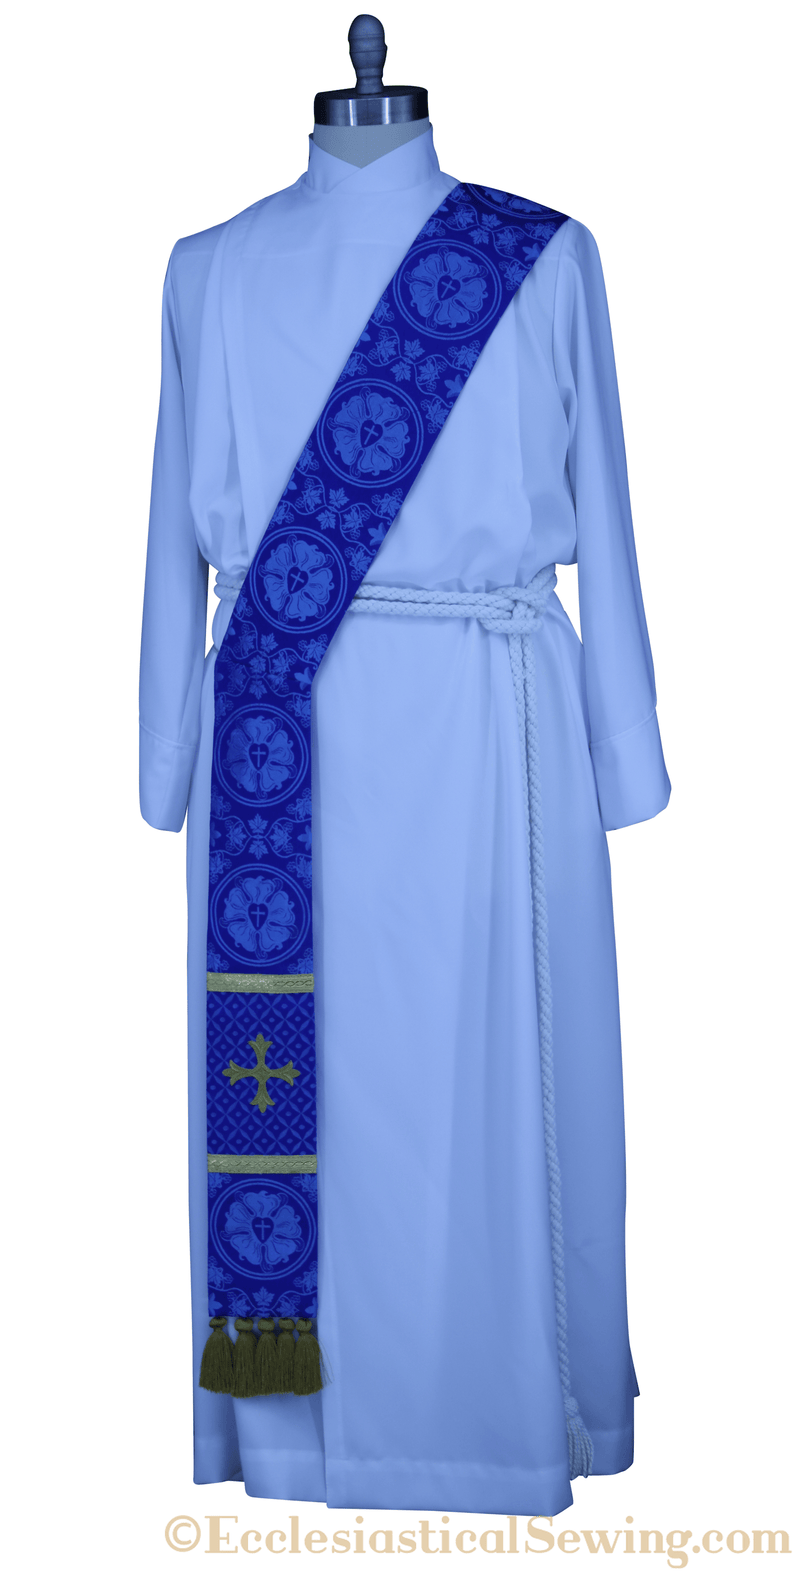 files/stole-style-2-or-deacon-stole-in-luther-rose-brocade-ecclesiastical-sewing-3-31789967212800.png